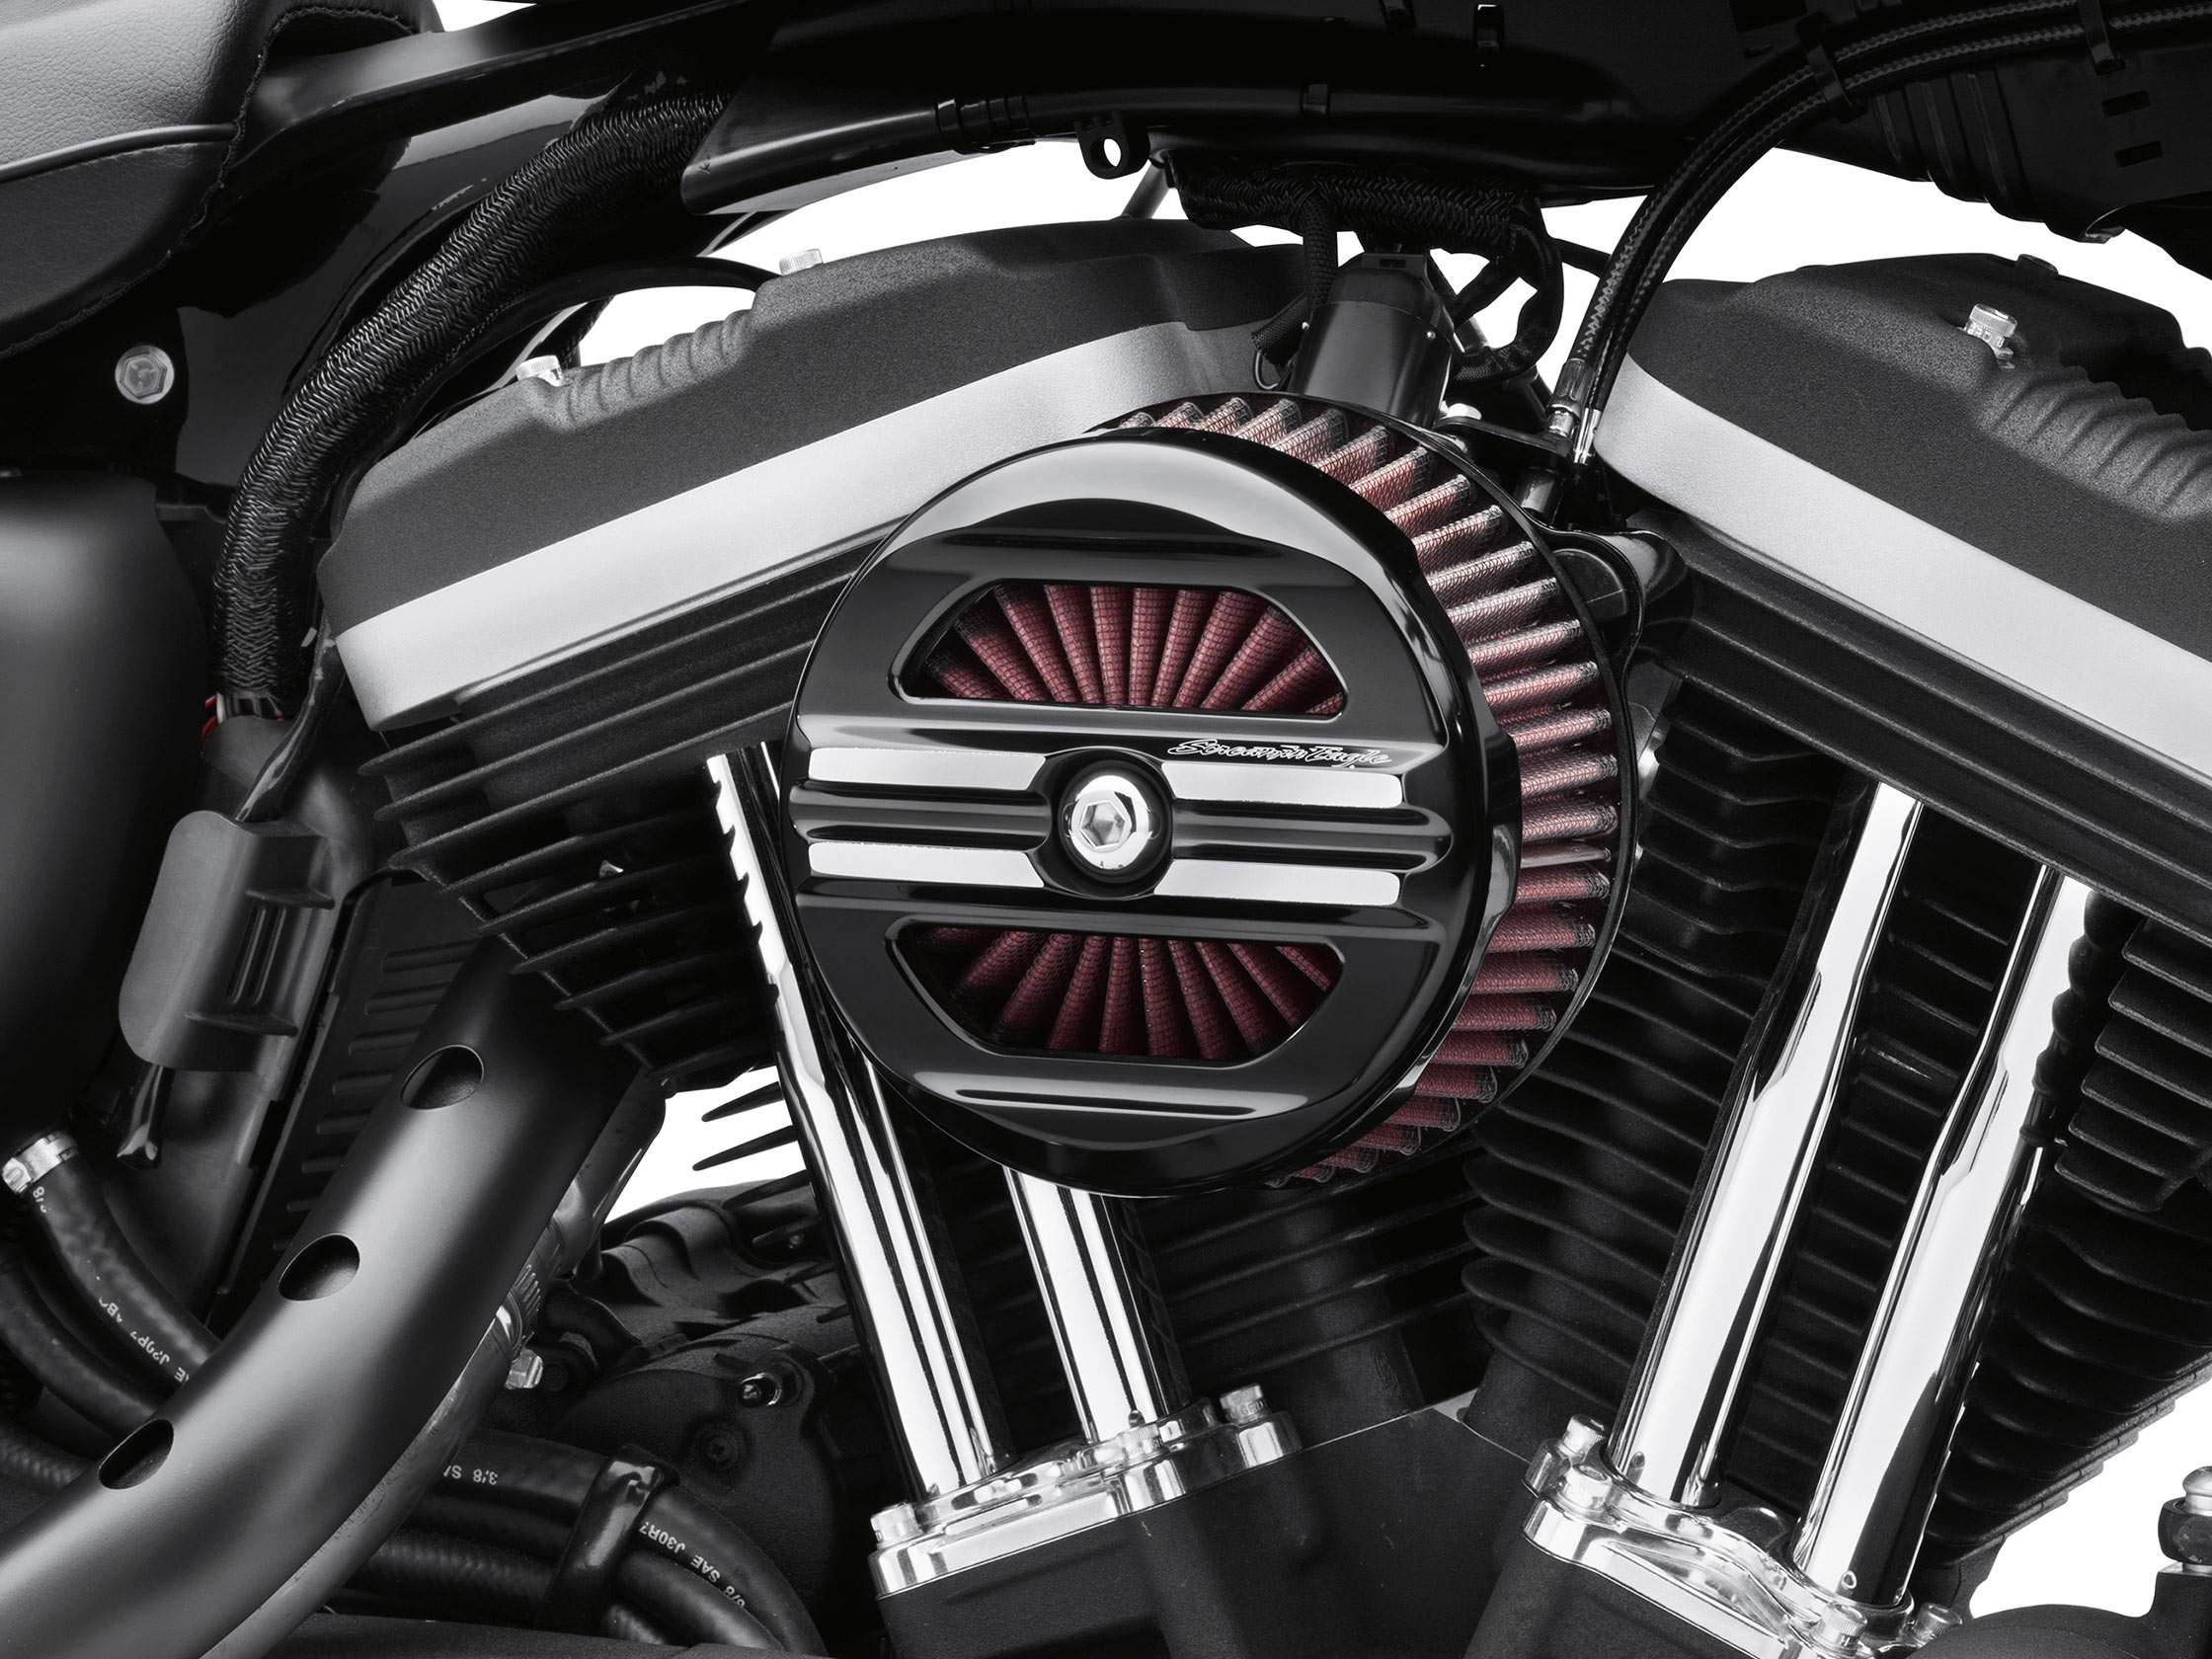 SCREAMIN' EAGLE PERFORMANCE<br />AIR CLEANER KIT - RAIL COLLECTION - Sportster® Stage I Upgrade 29400232A / Air Filter Kits / Screamin´ eagle /  Parts & Accessories / - House-of-Flames Harley-Davidson